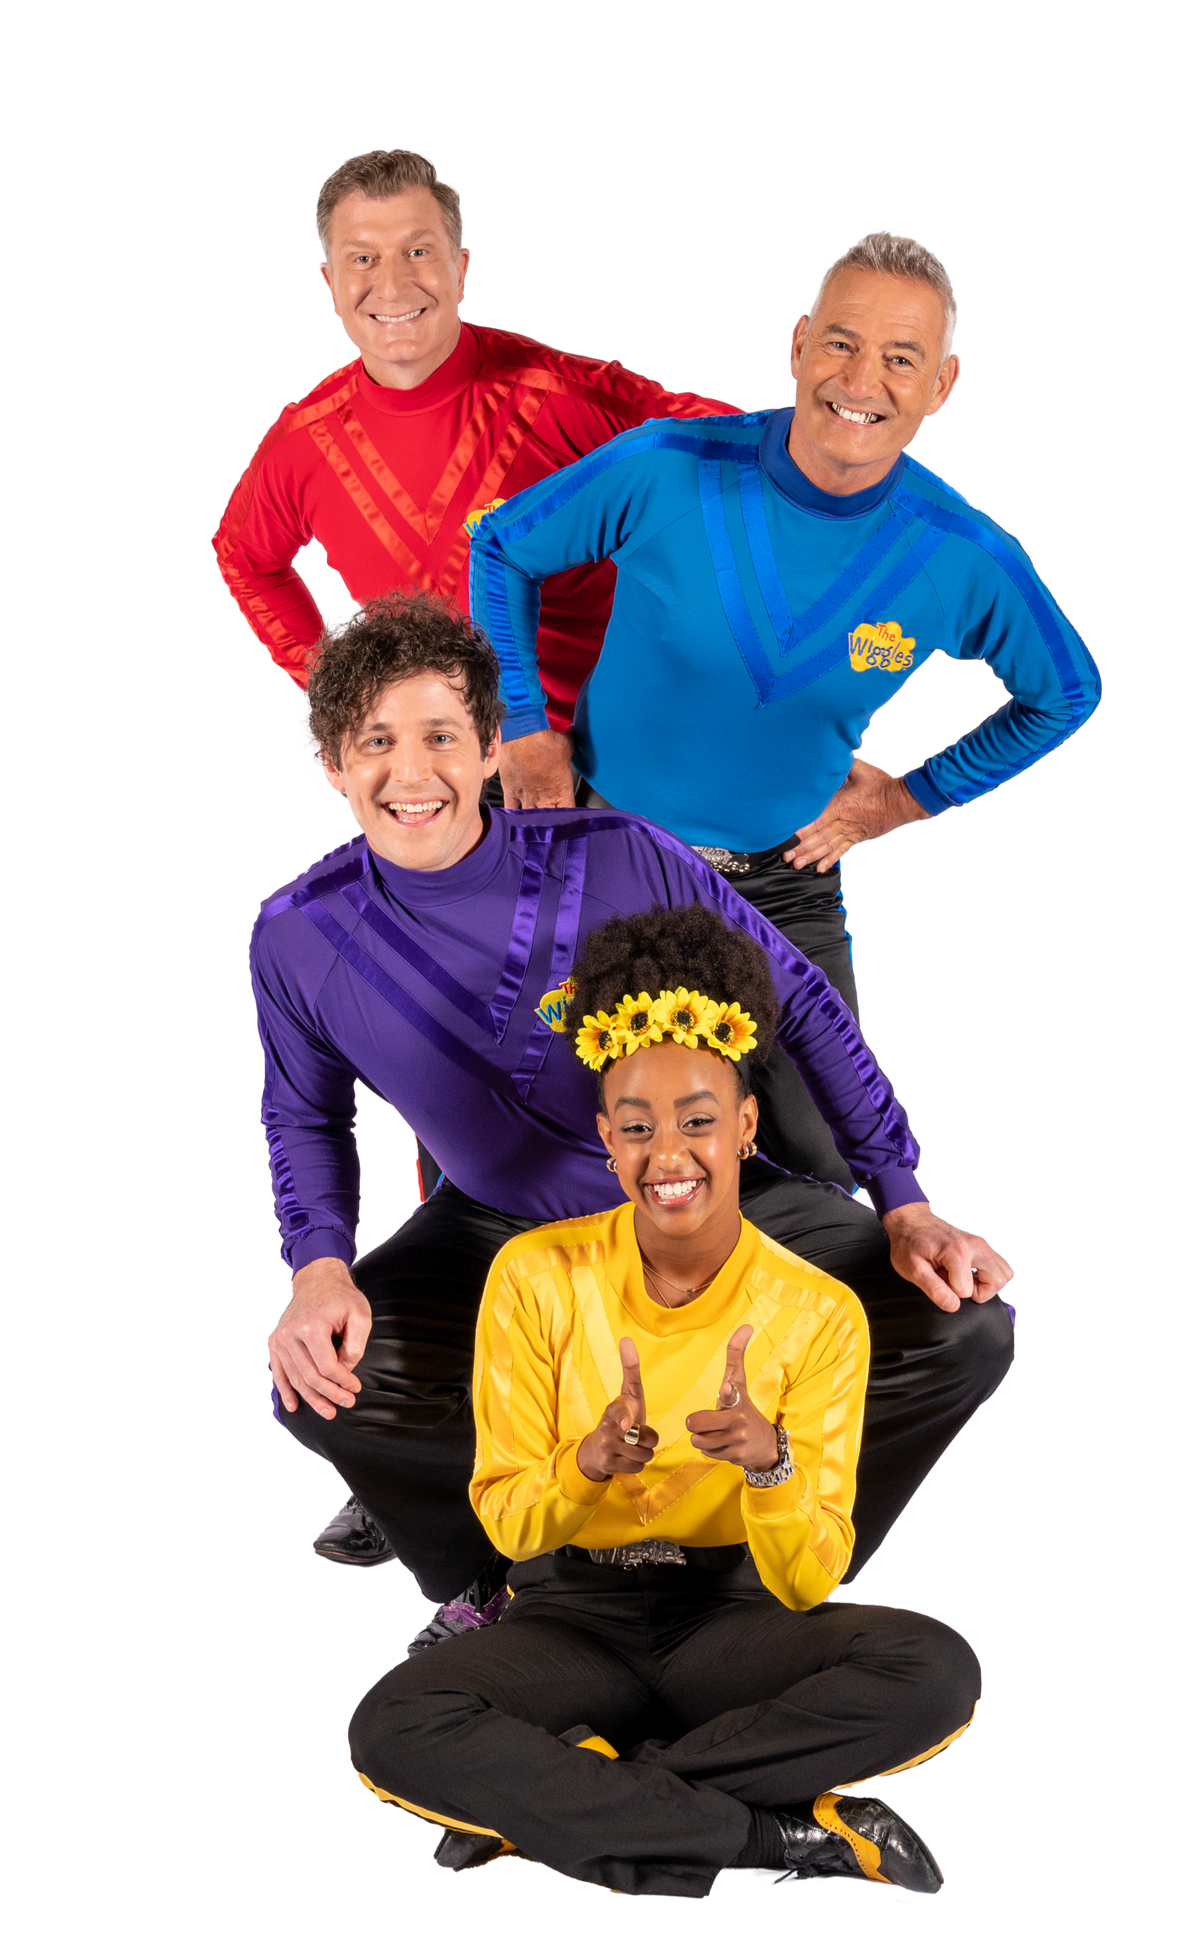 The Wiggles: 'Hello! We're the Wiggles' LIVE in Concert - Clocktower Centre